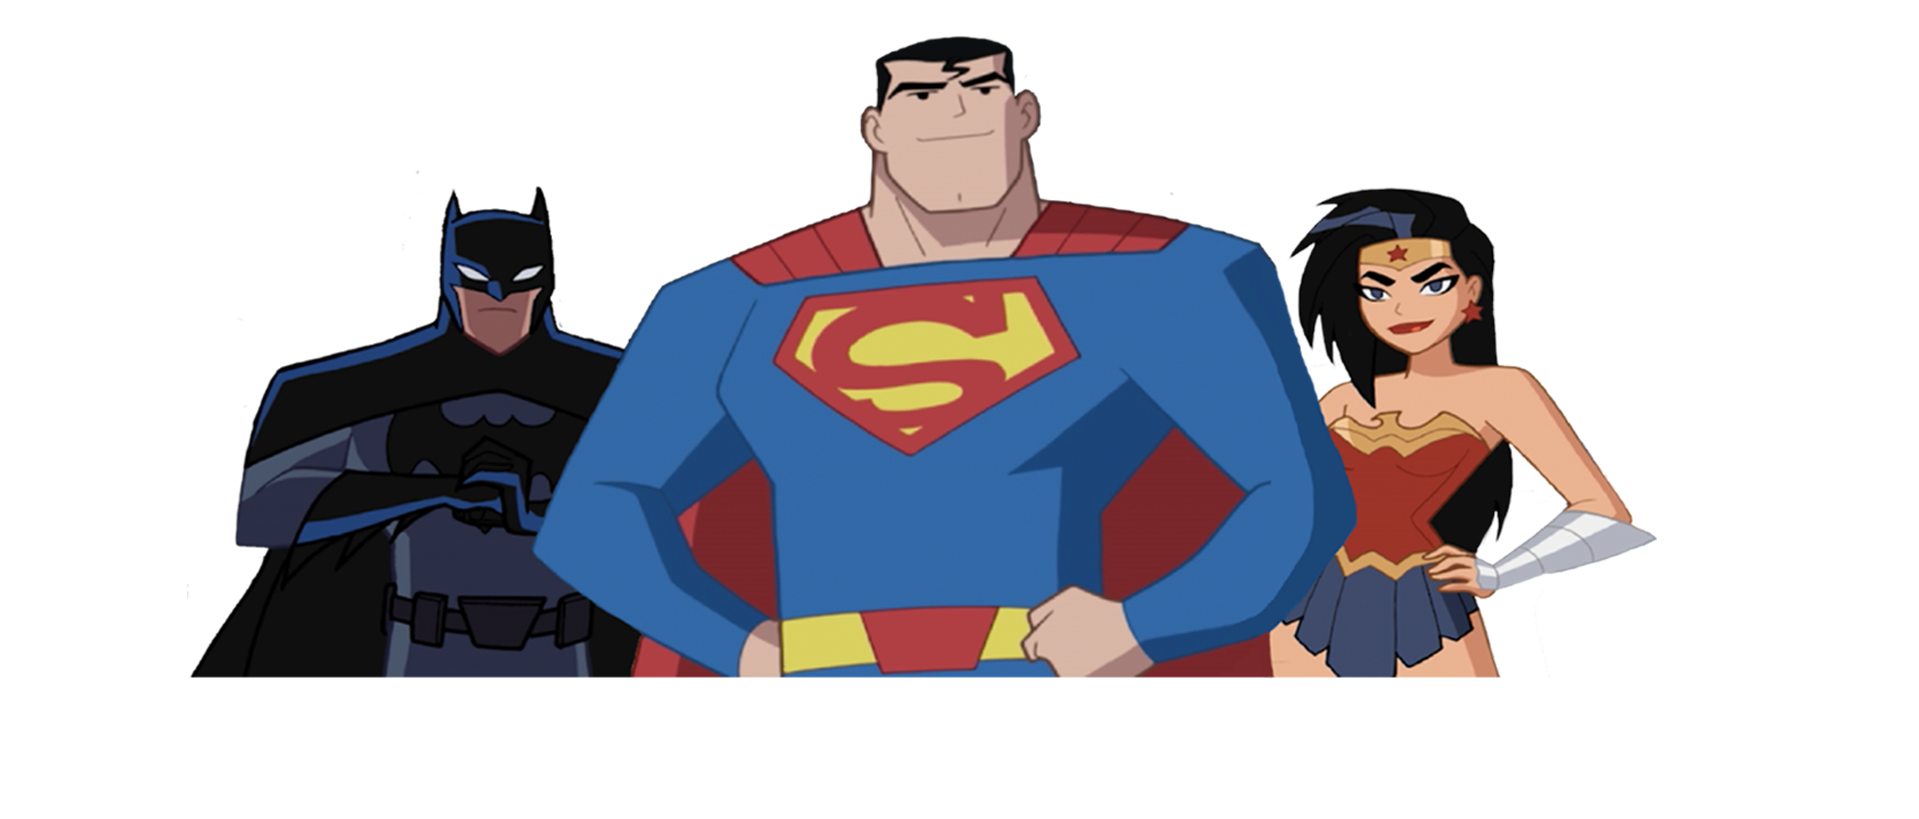 Play Justice League Action games | Free online Justice League Action games  | Cartoon Network